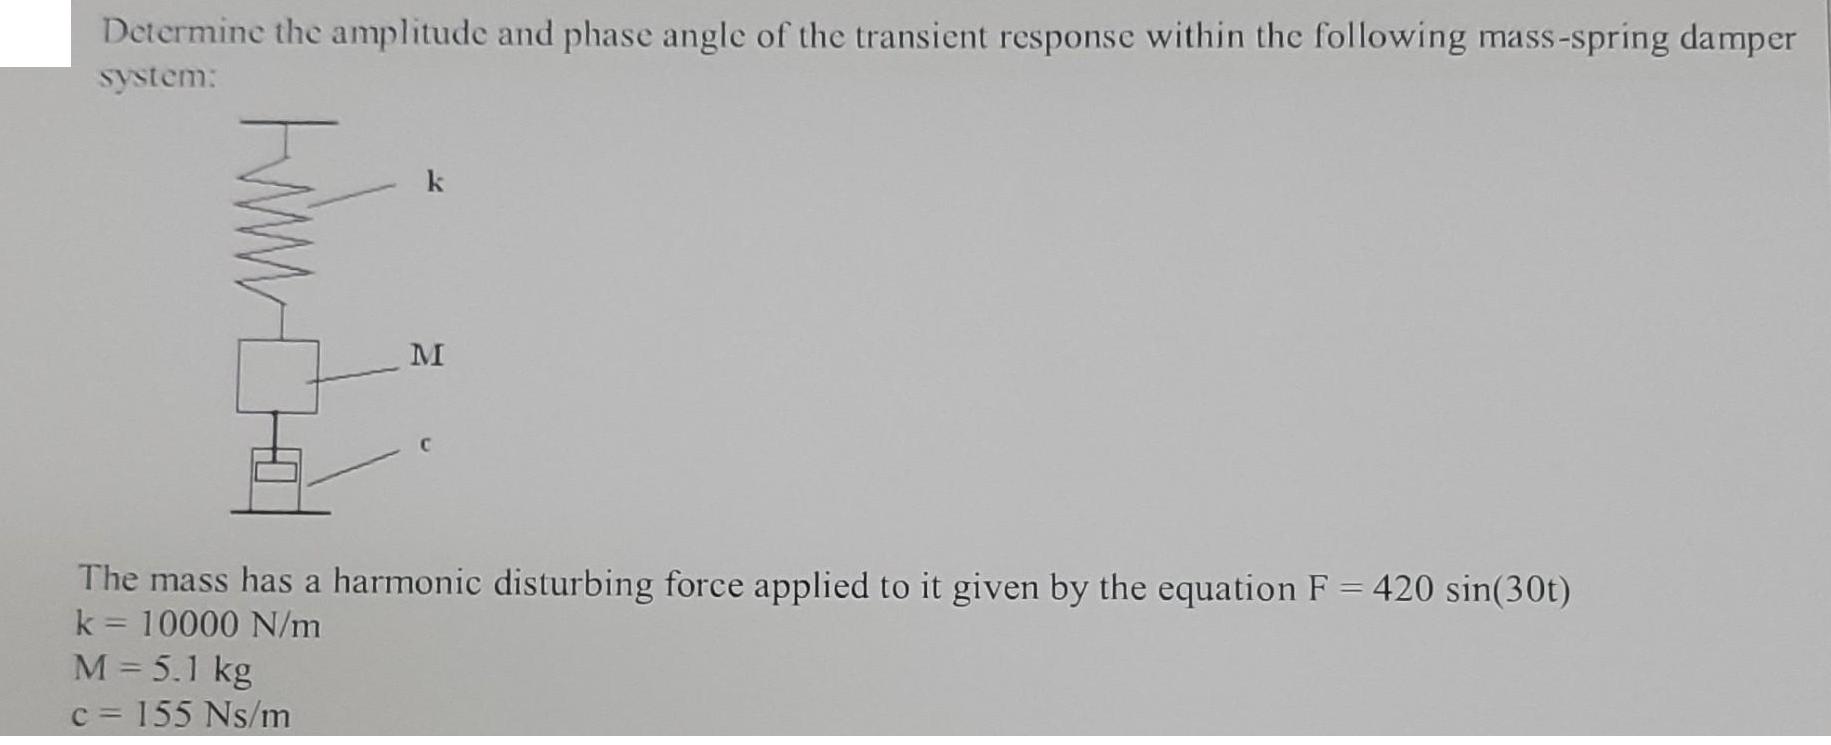 Determine the amplitude and phase angle of the transient response within the following mass-spring damper